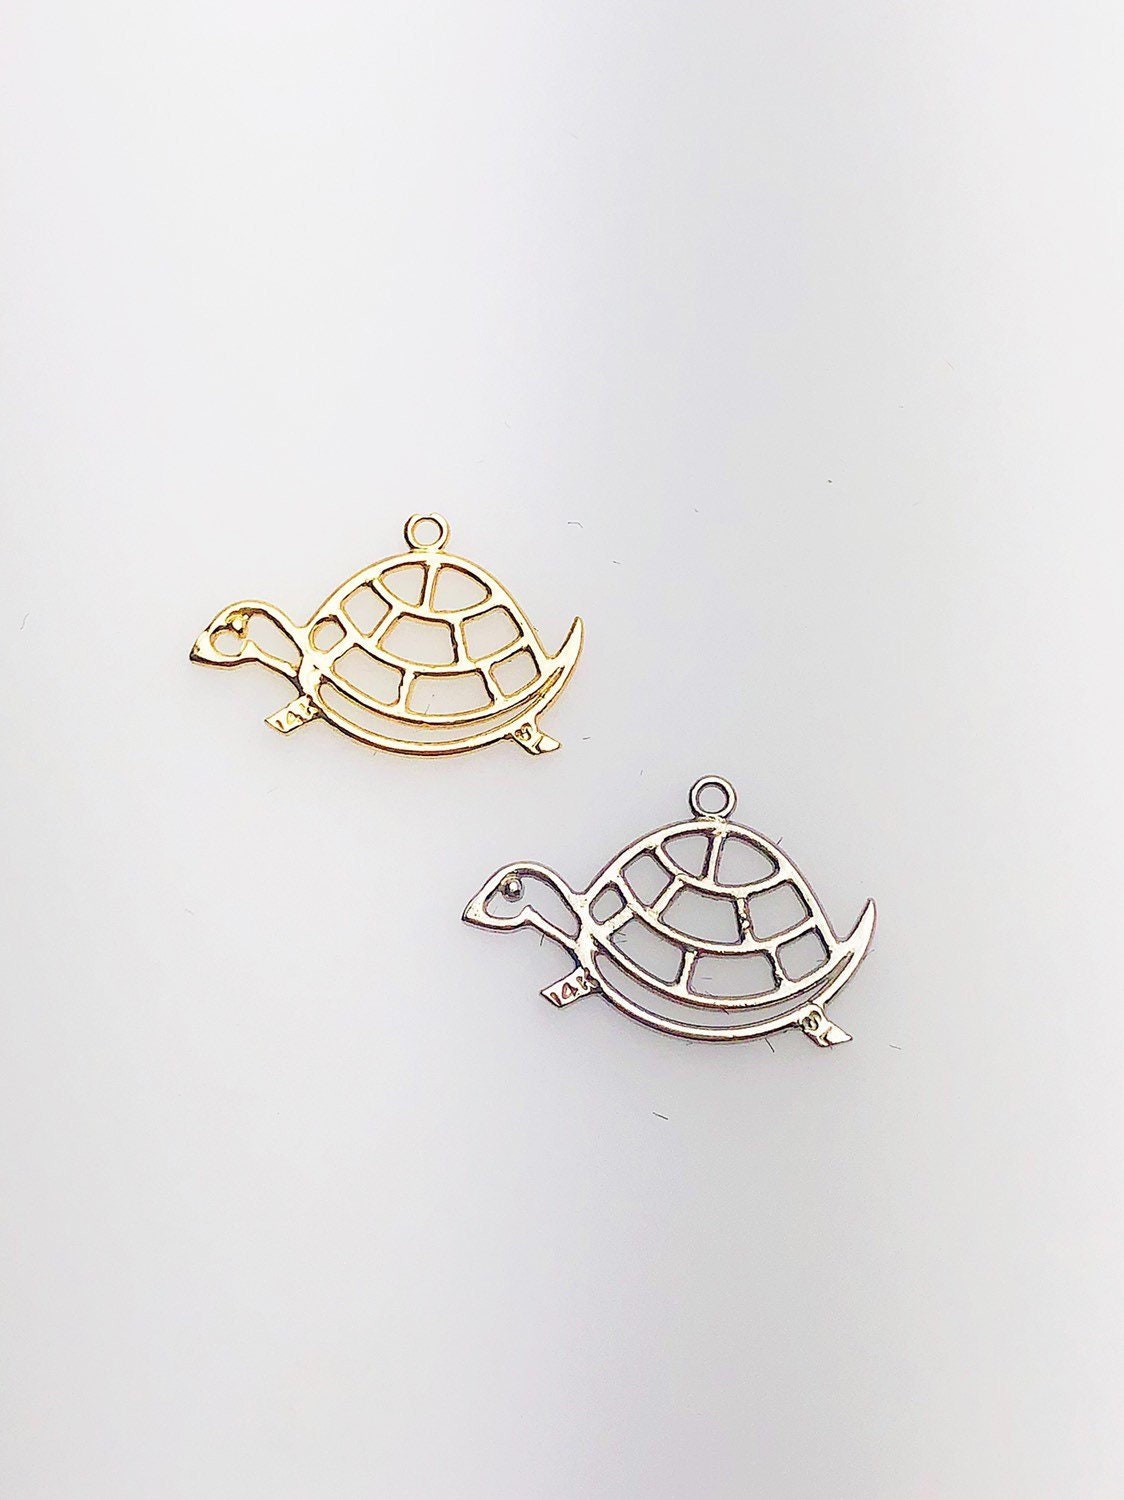 14K Solid Gold Turtle Charm w/ Ring, 17.1x11.3mm, Made in USA (L-105)